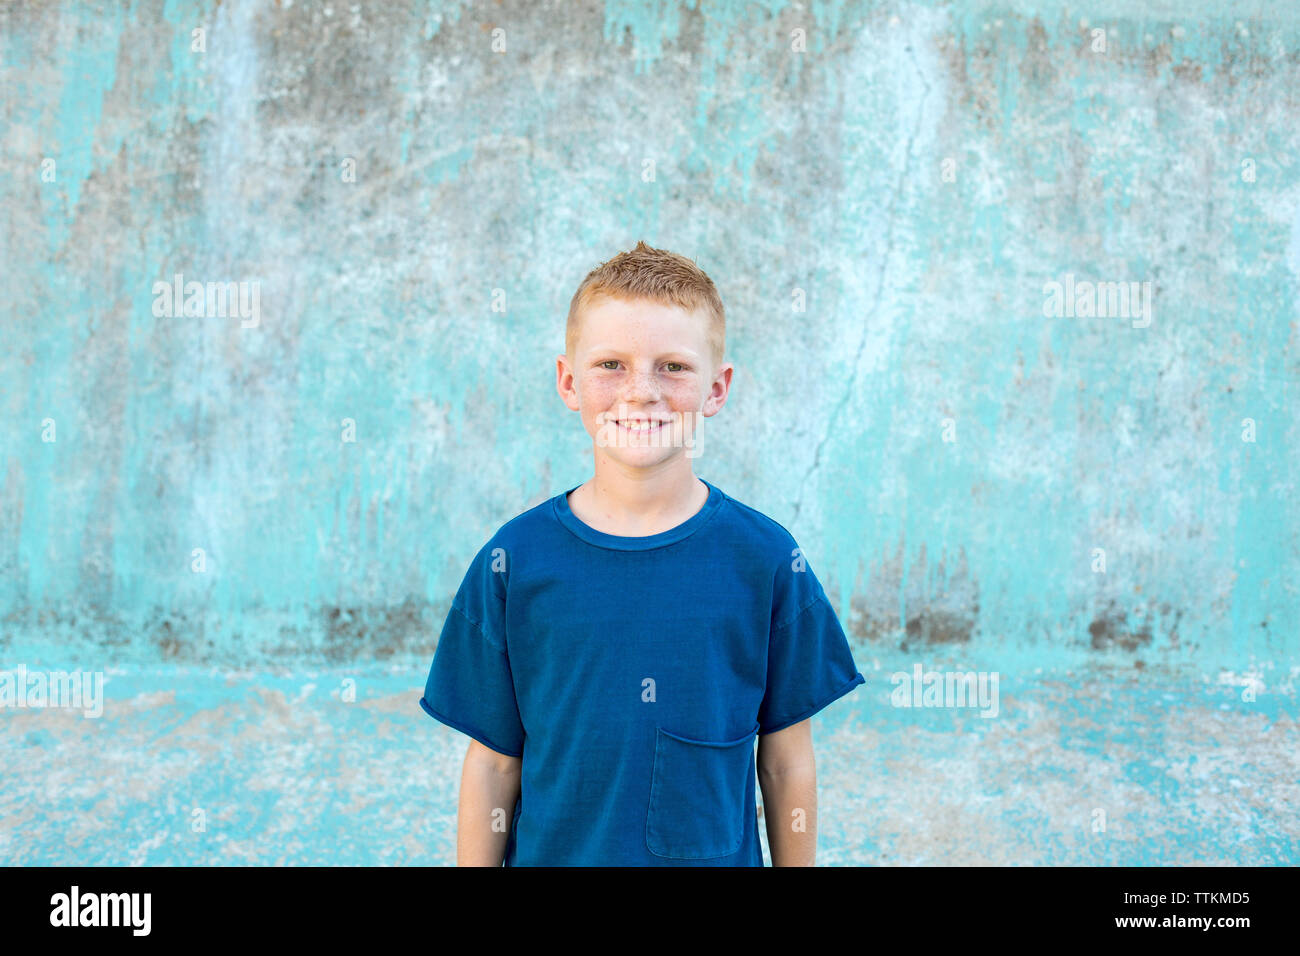 Portrait of a boy with red hair with a blue shirt and blue background Stock Photo